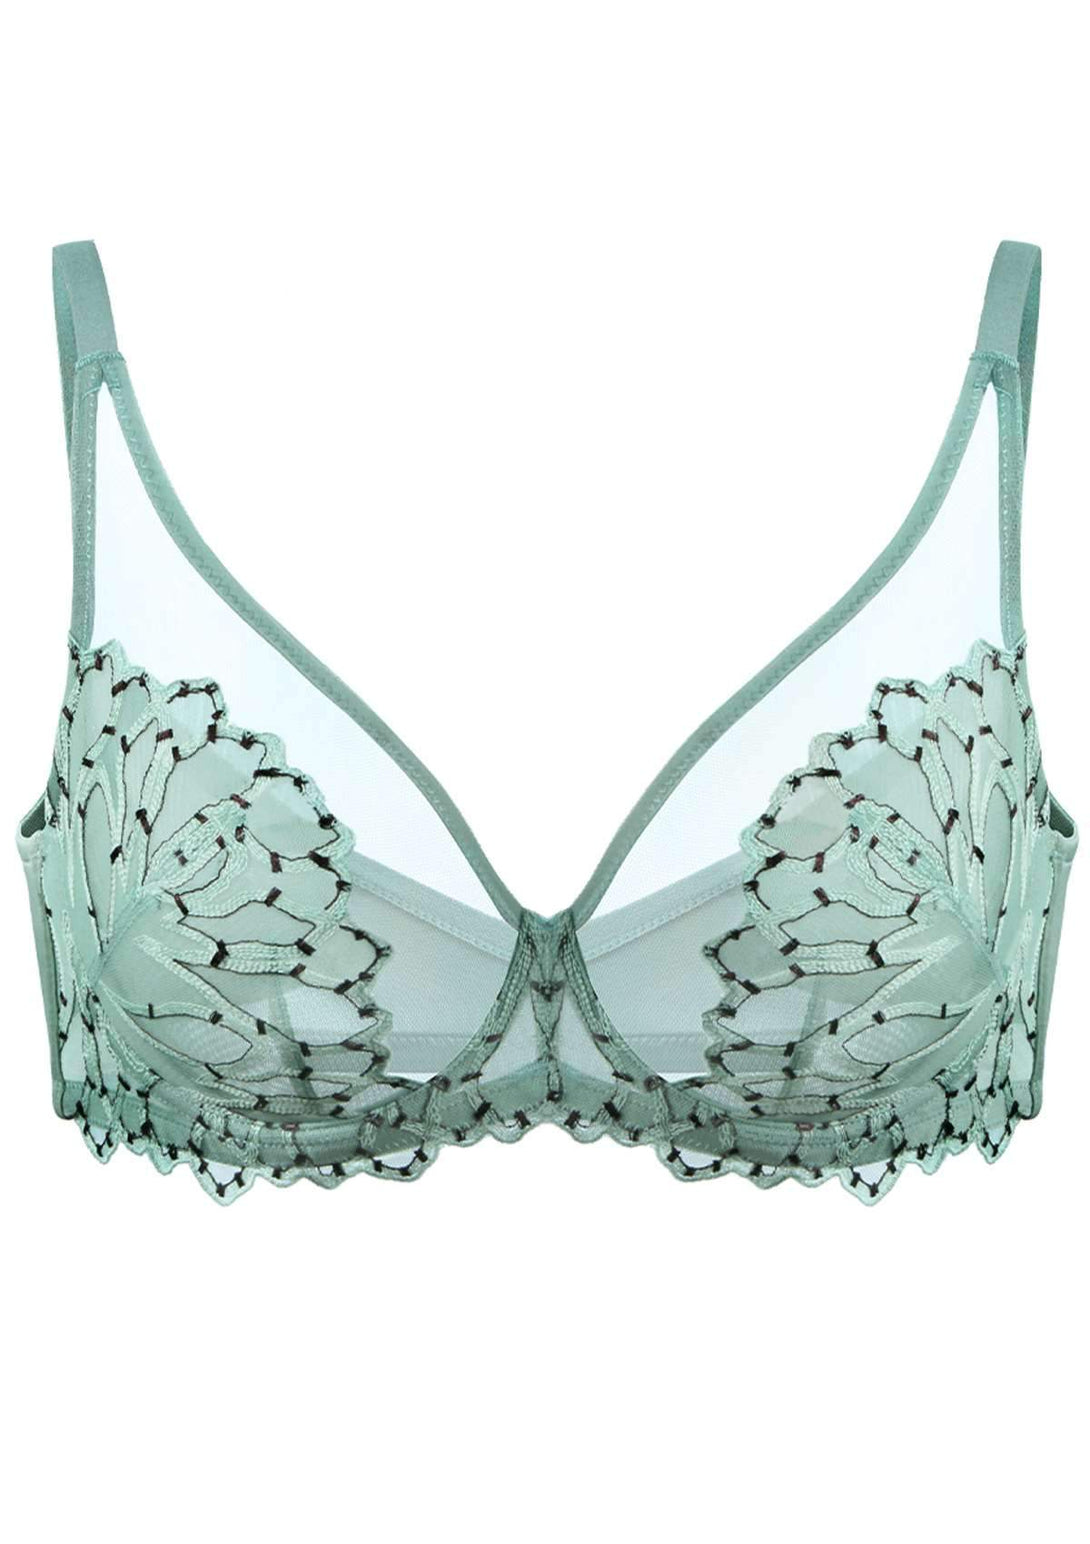 HSIA HSIA Gorgeous Unlined Lace Bra